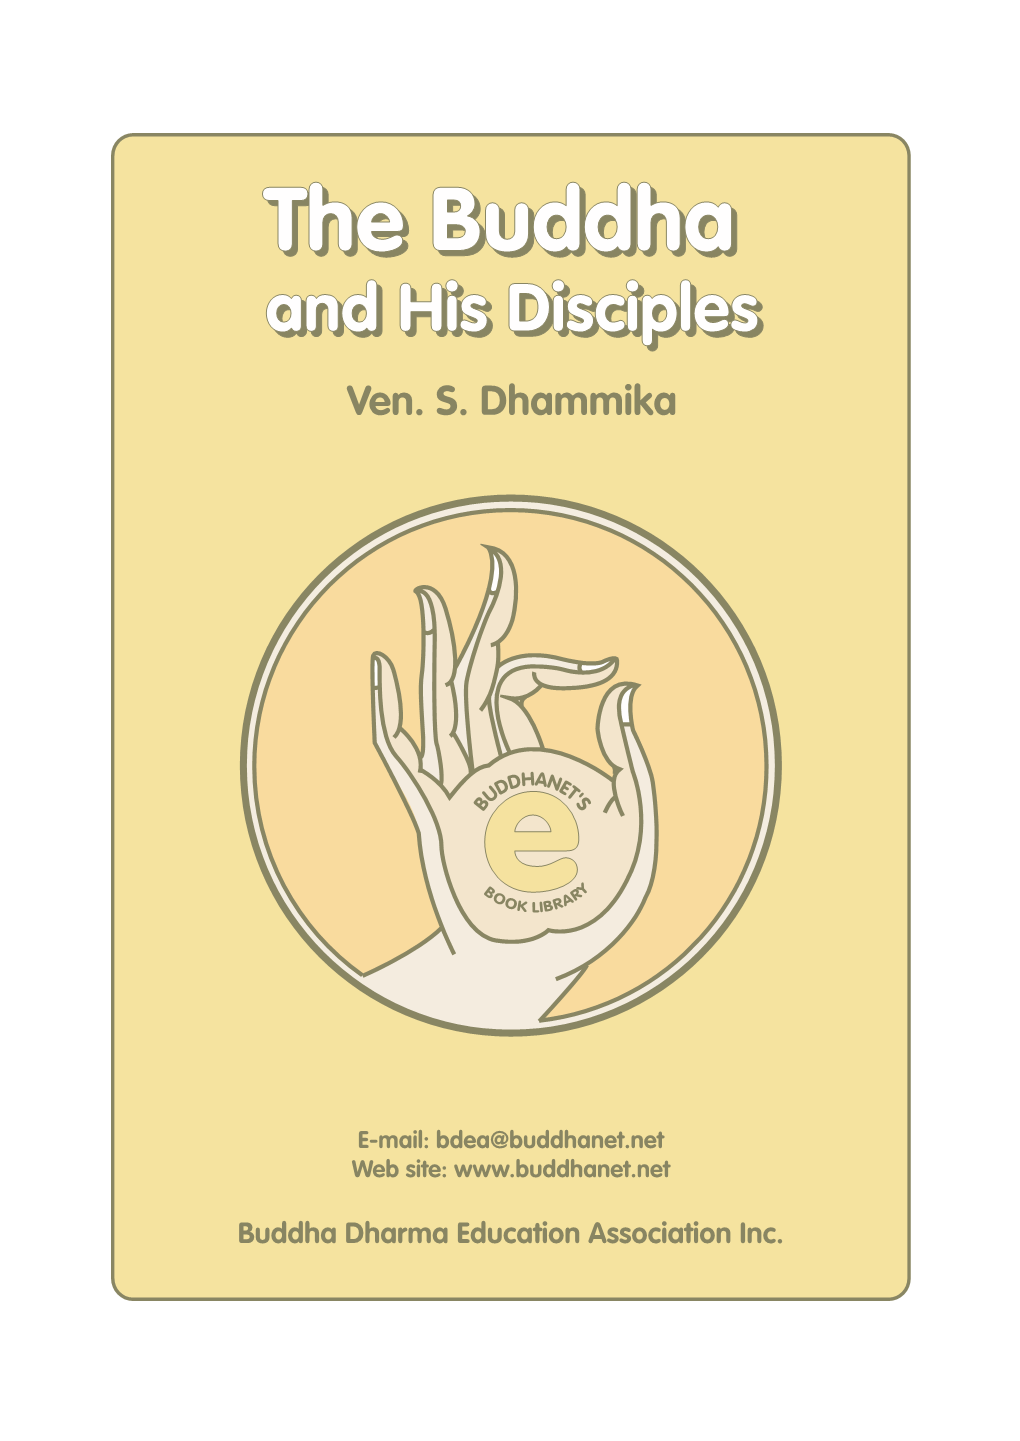 The Buddha and His Disciples As Told in Pali Sources Is Not Just an Authentic and Fascinating One, It Is Also One That Has a Spiritual Significance